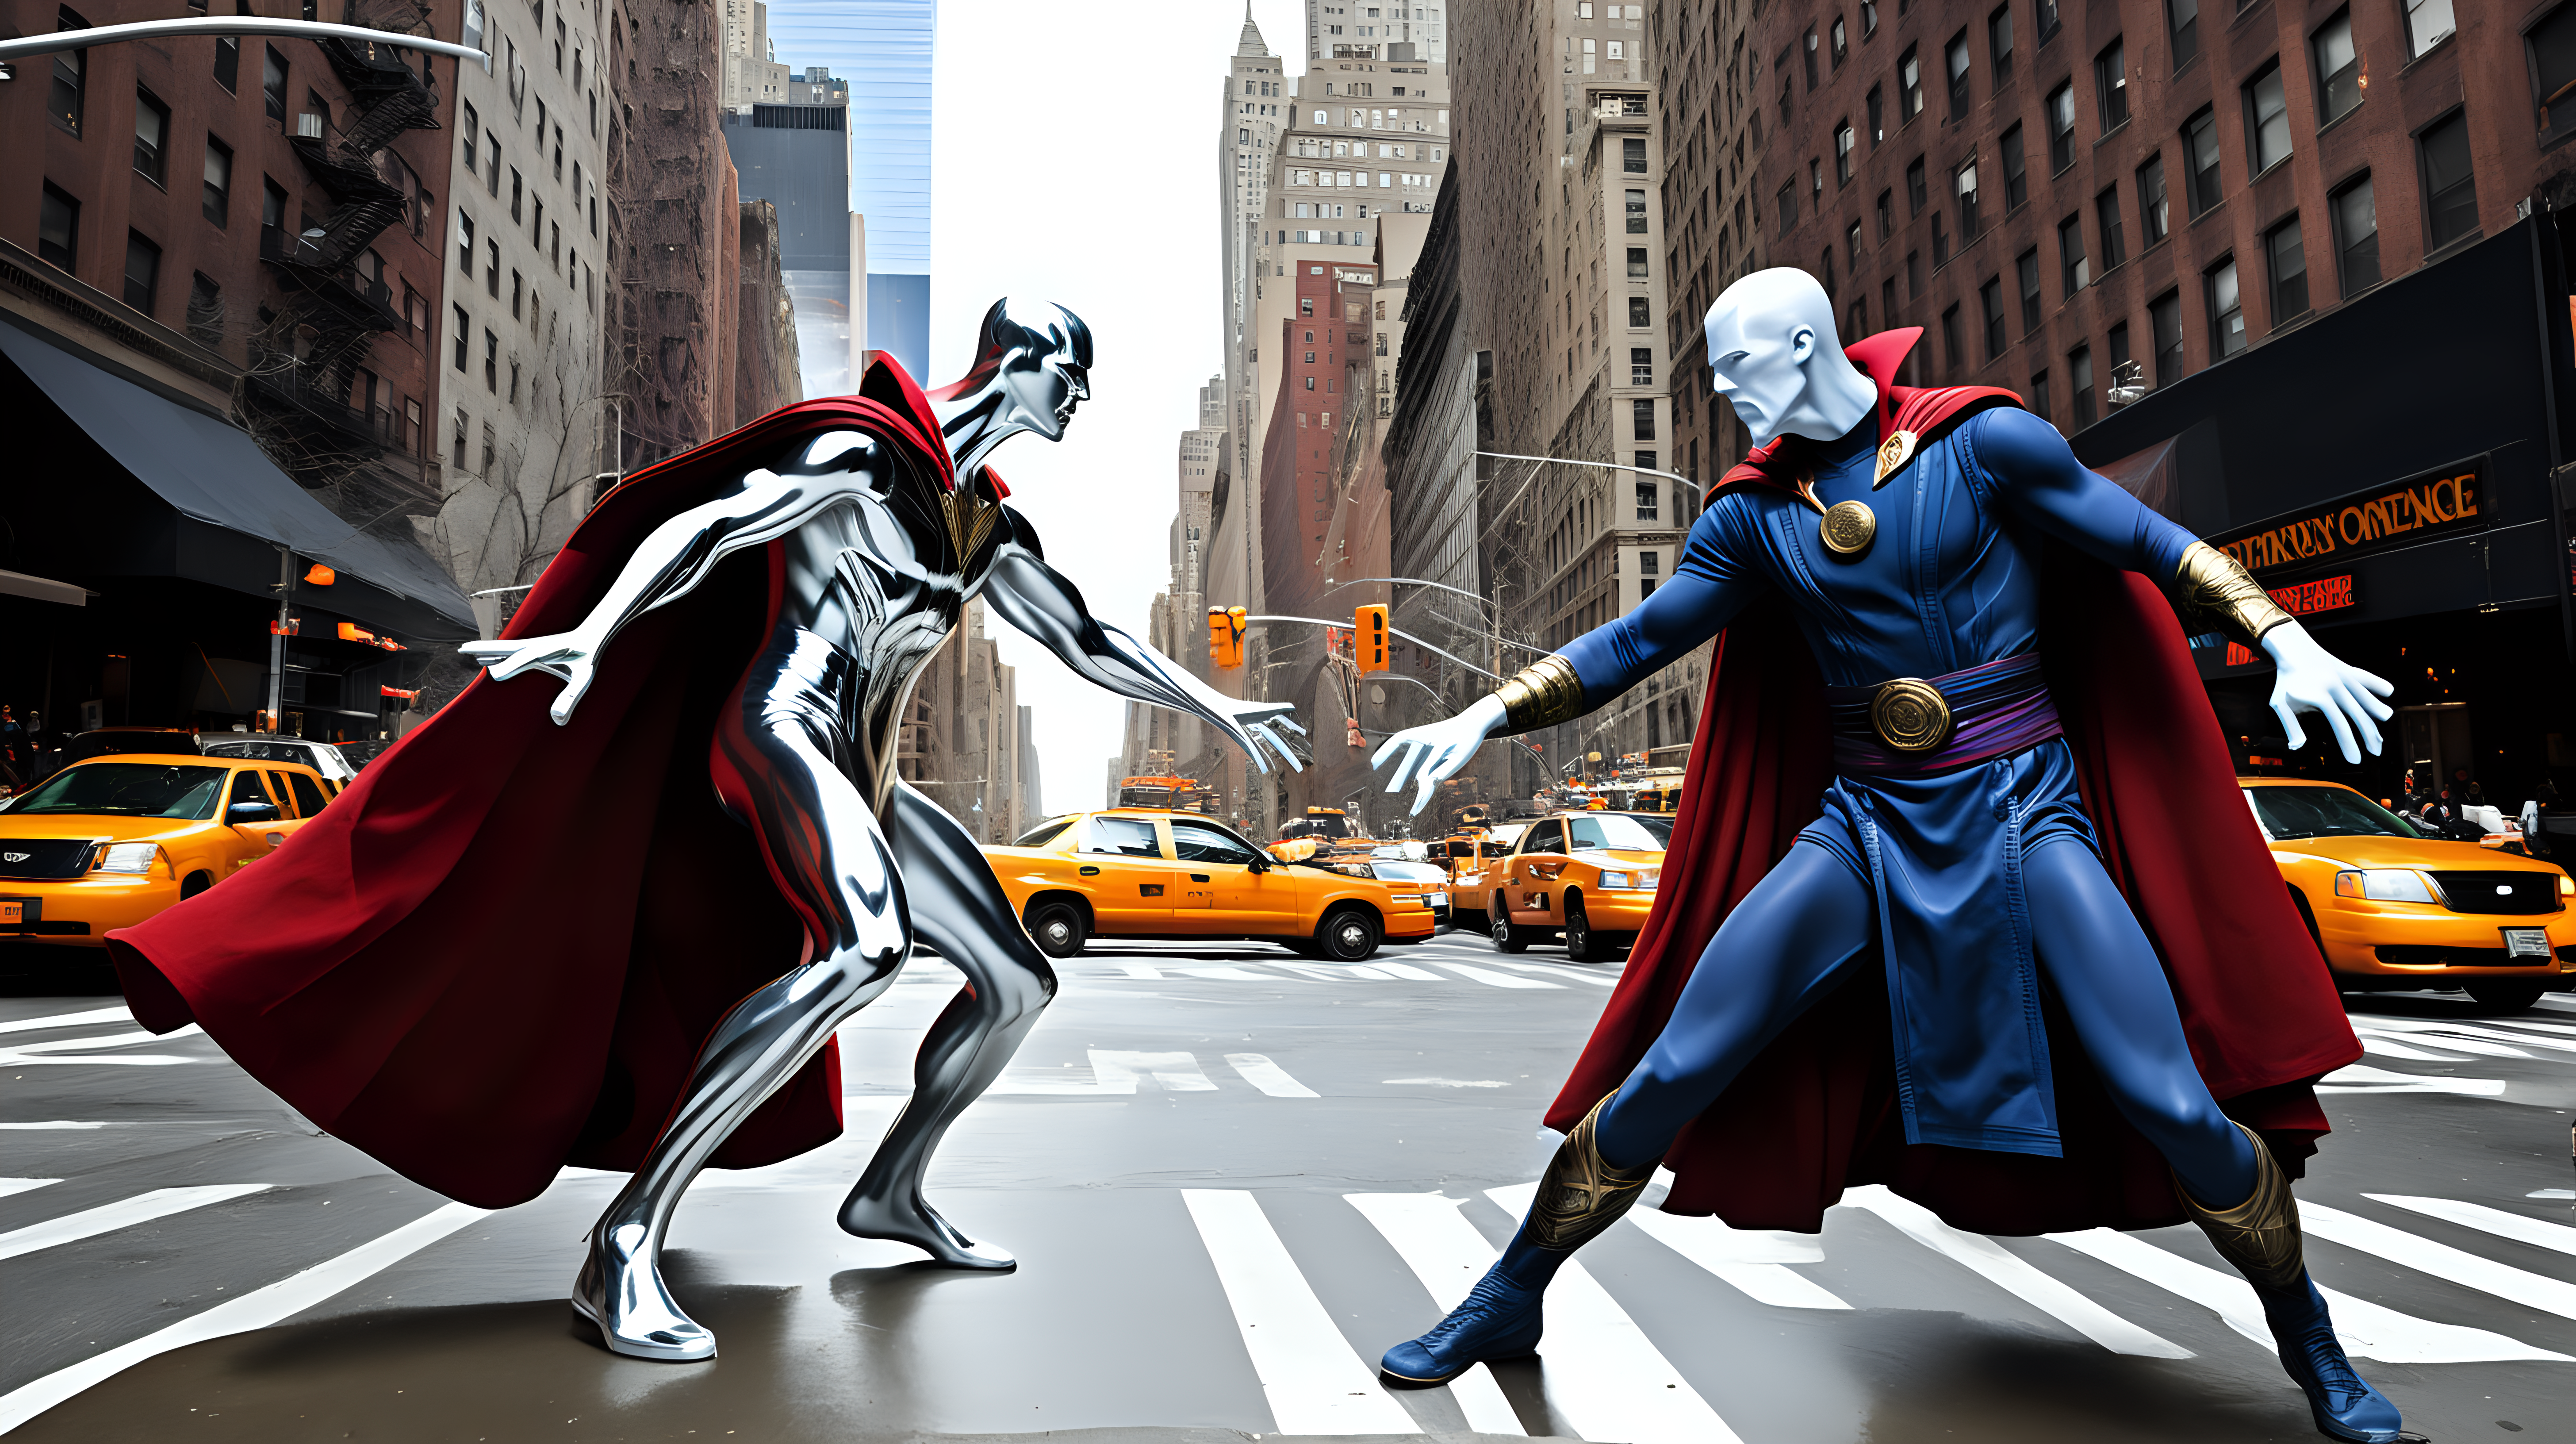 The Silver Surfer fighting Doctor Strange in NYC